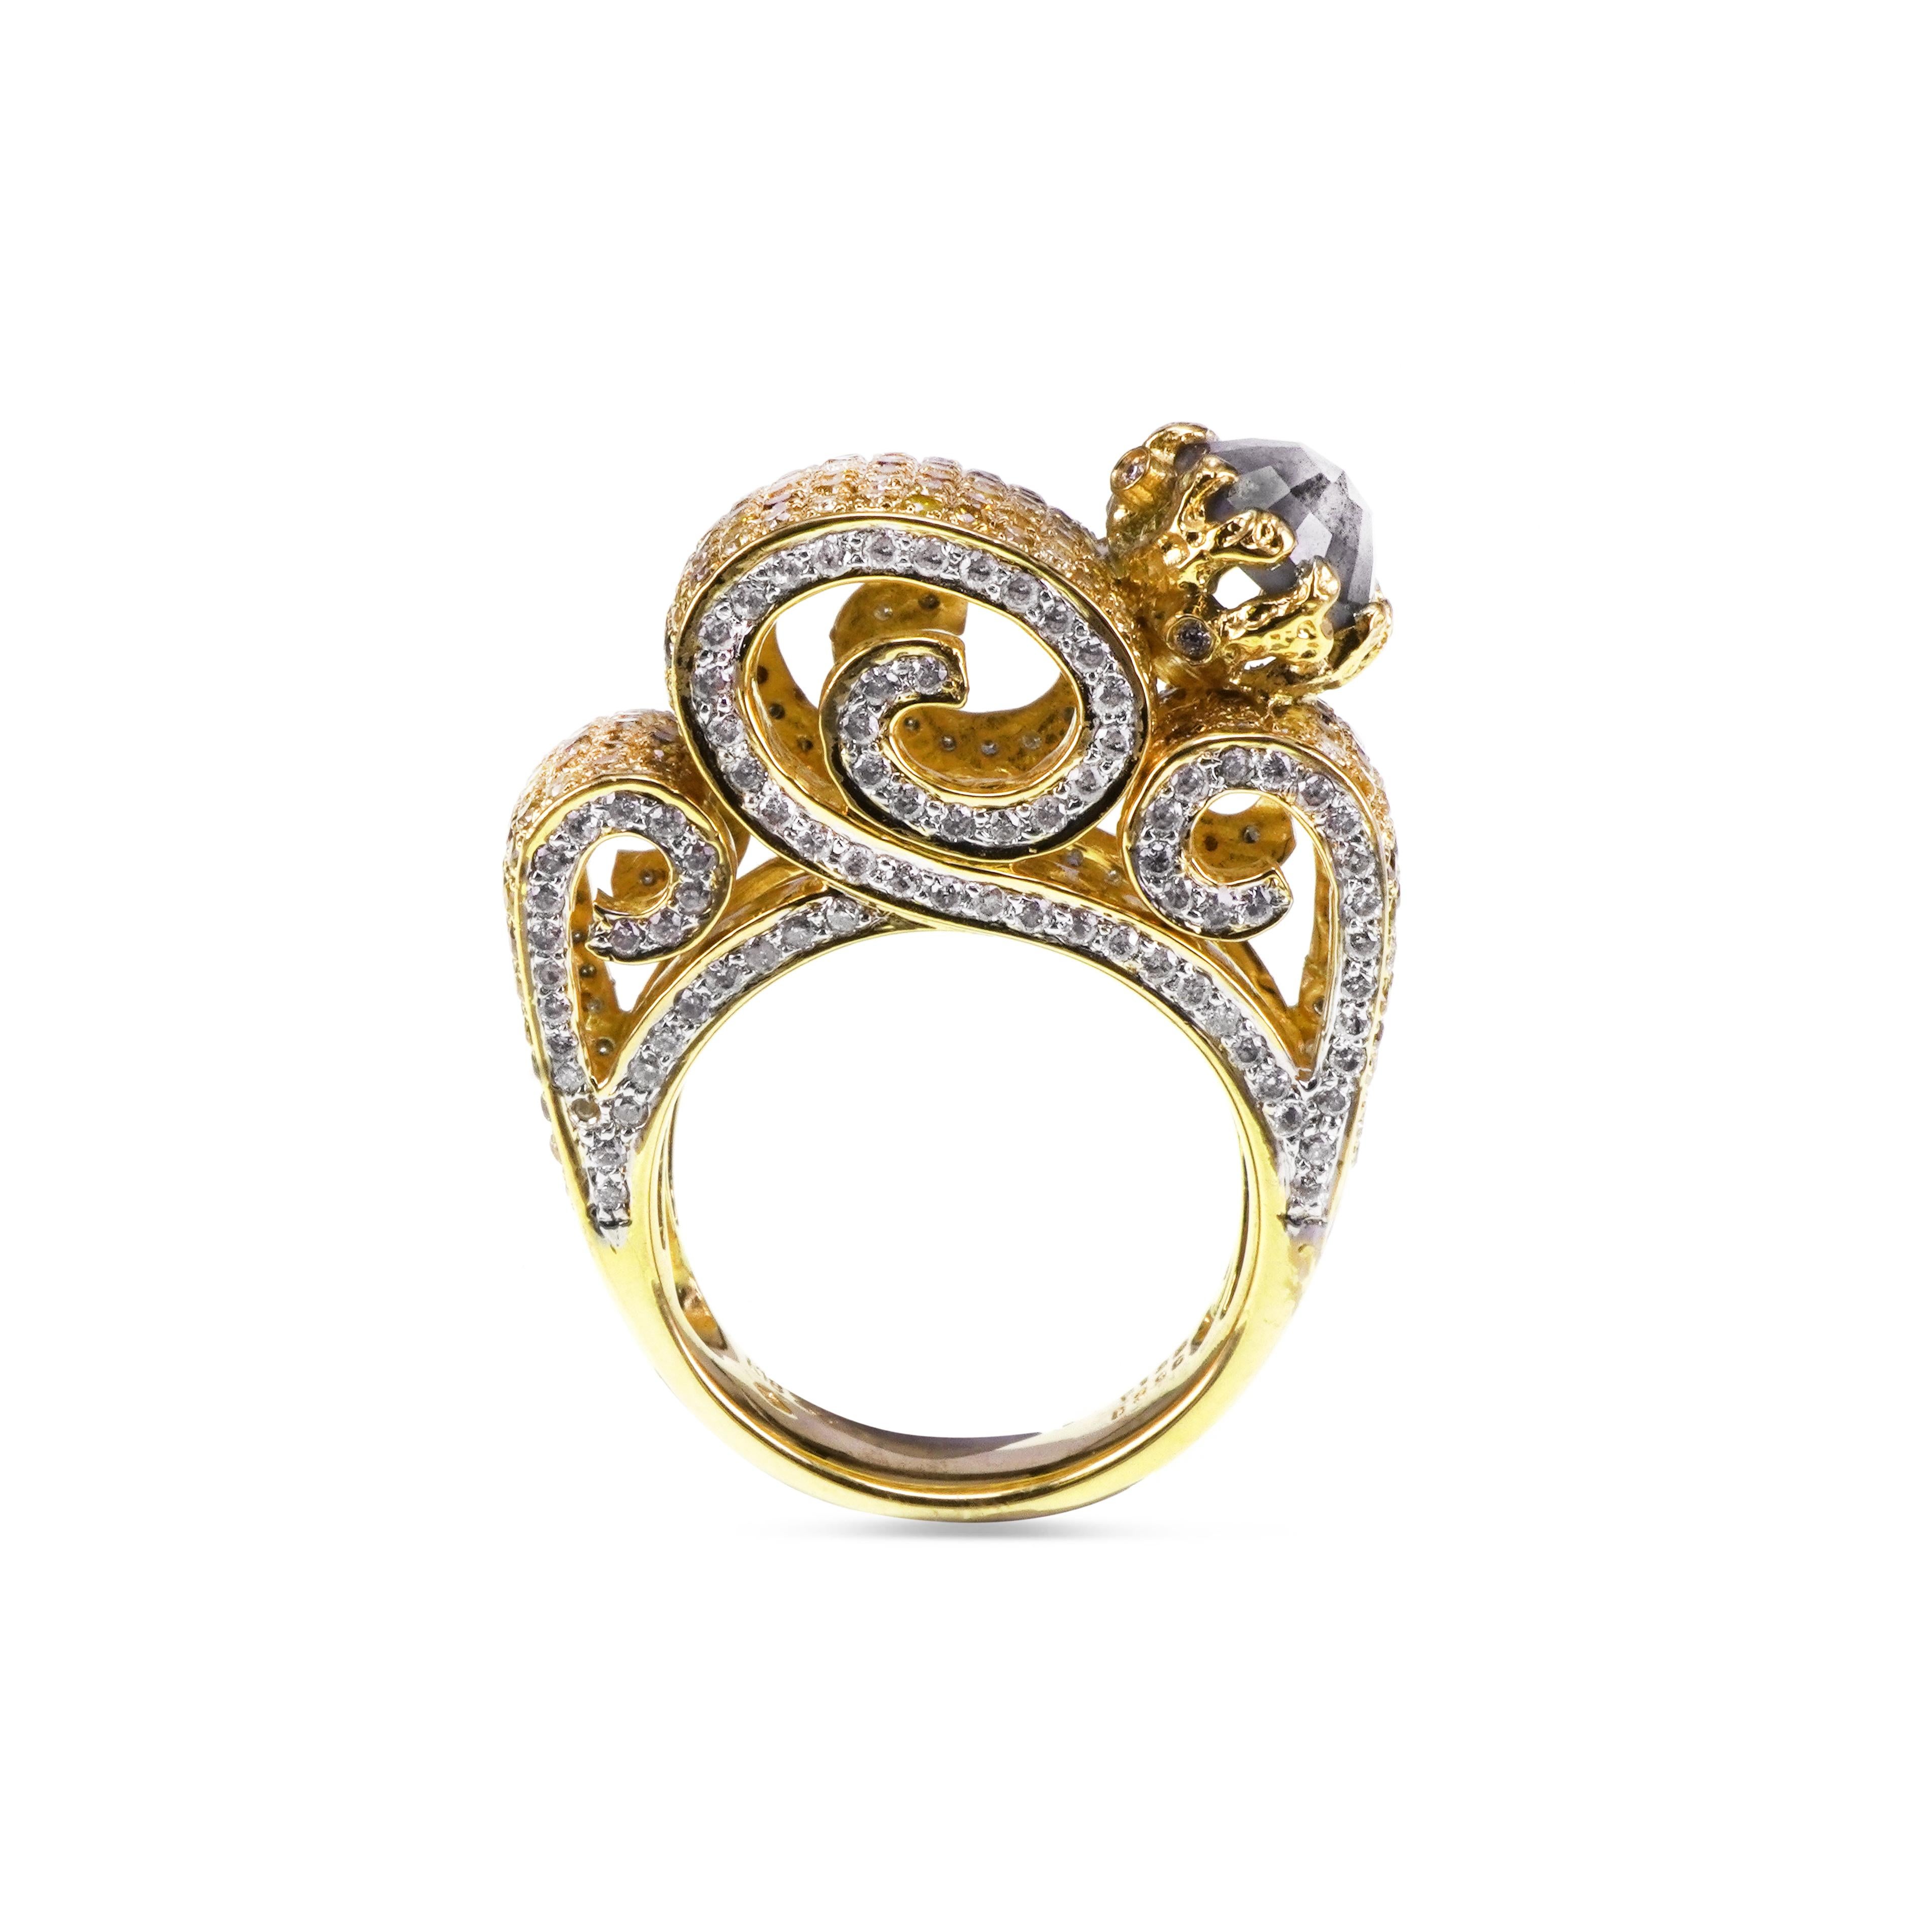 Contemporary 1.88 Carat Salt and Pepper Diamond Cocktail Imperfect 18K Heavy Gold Ring